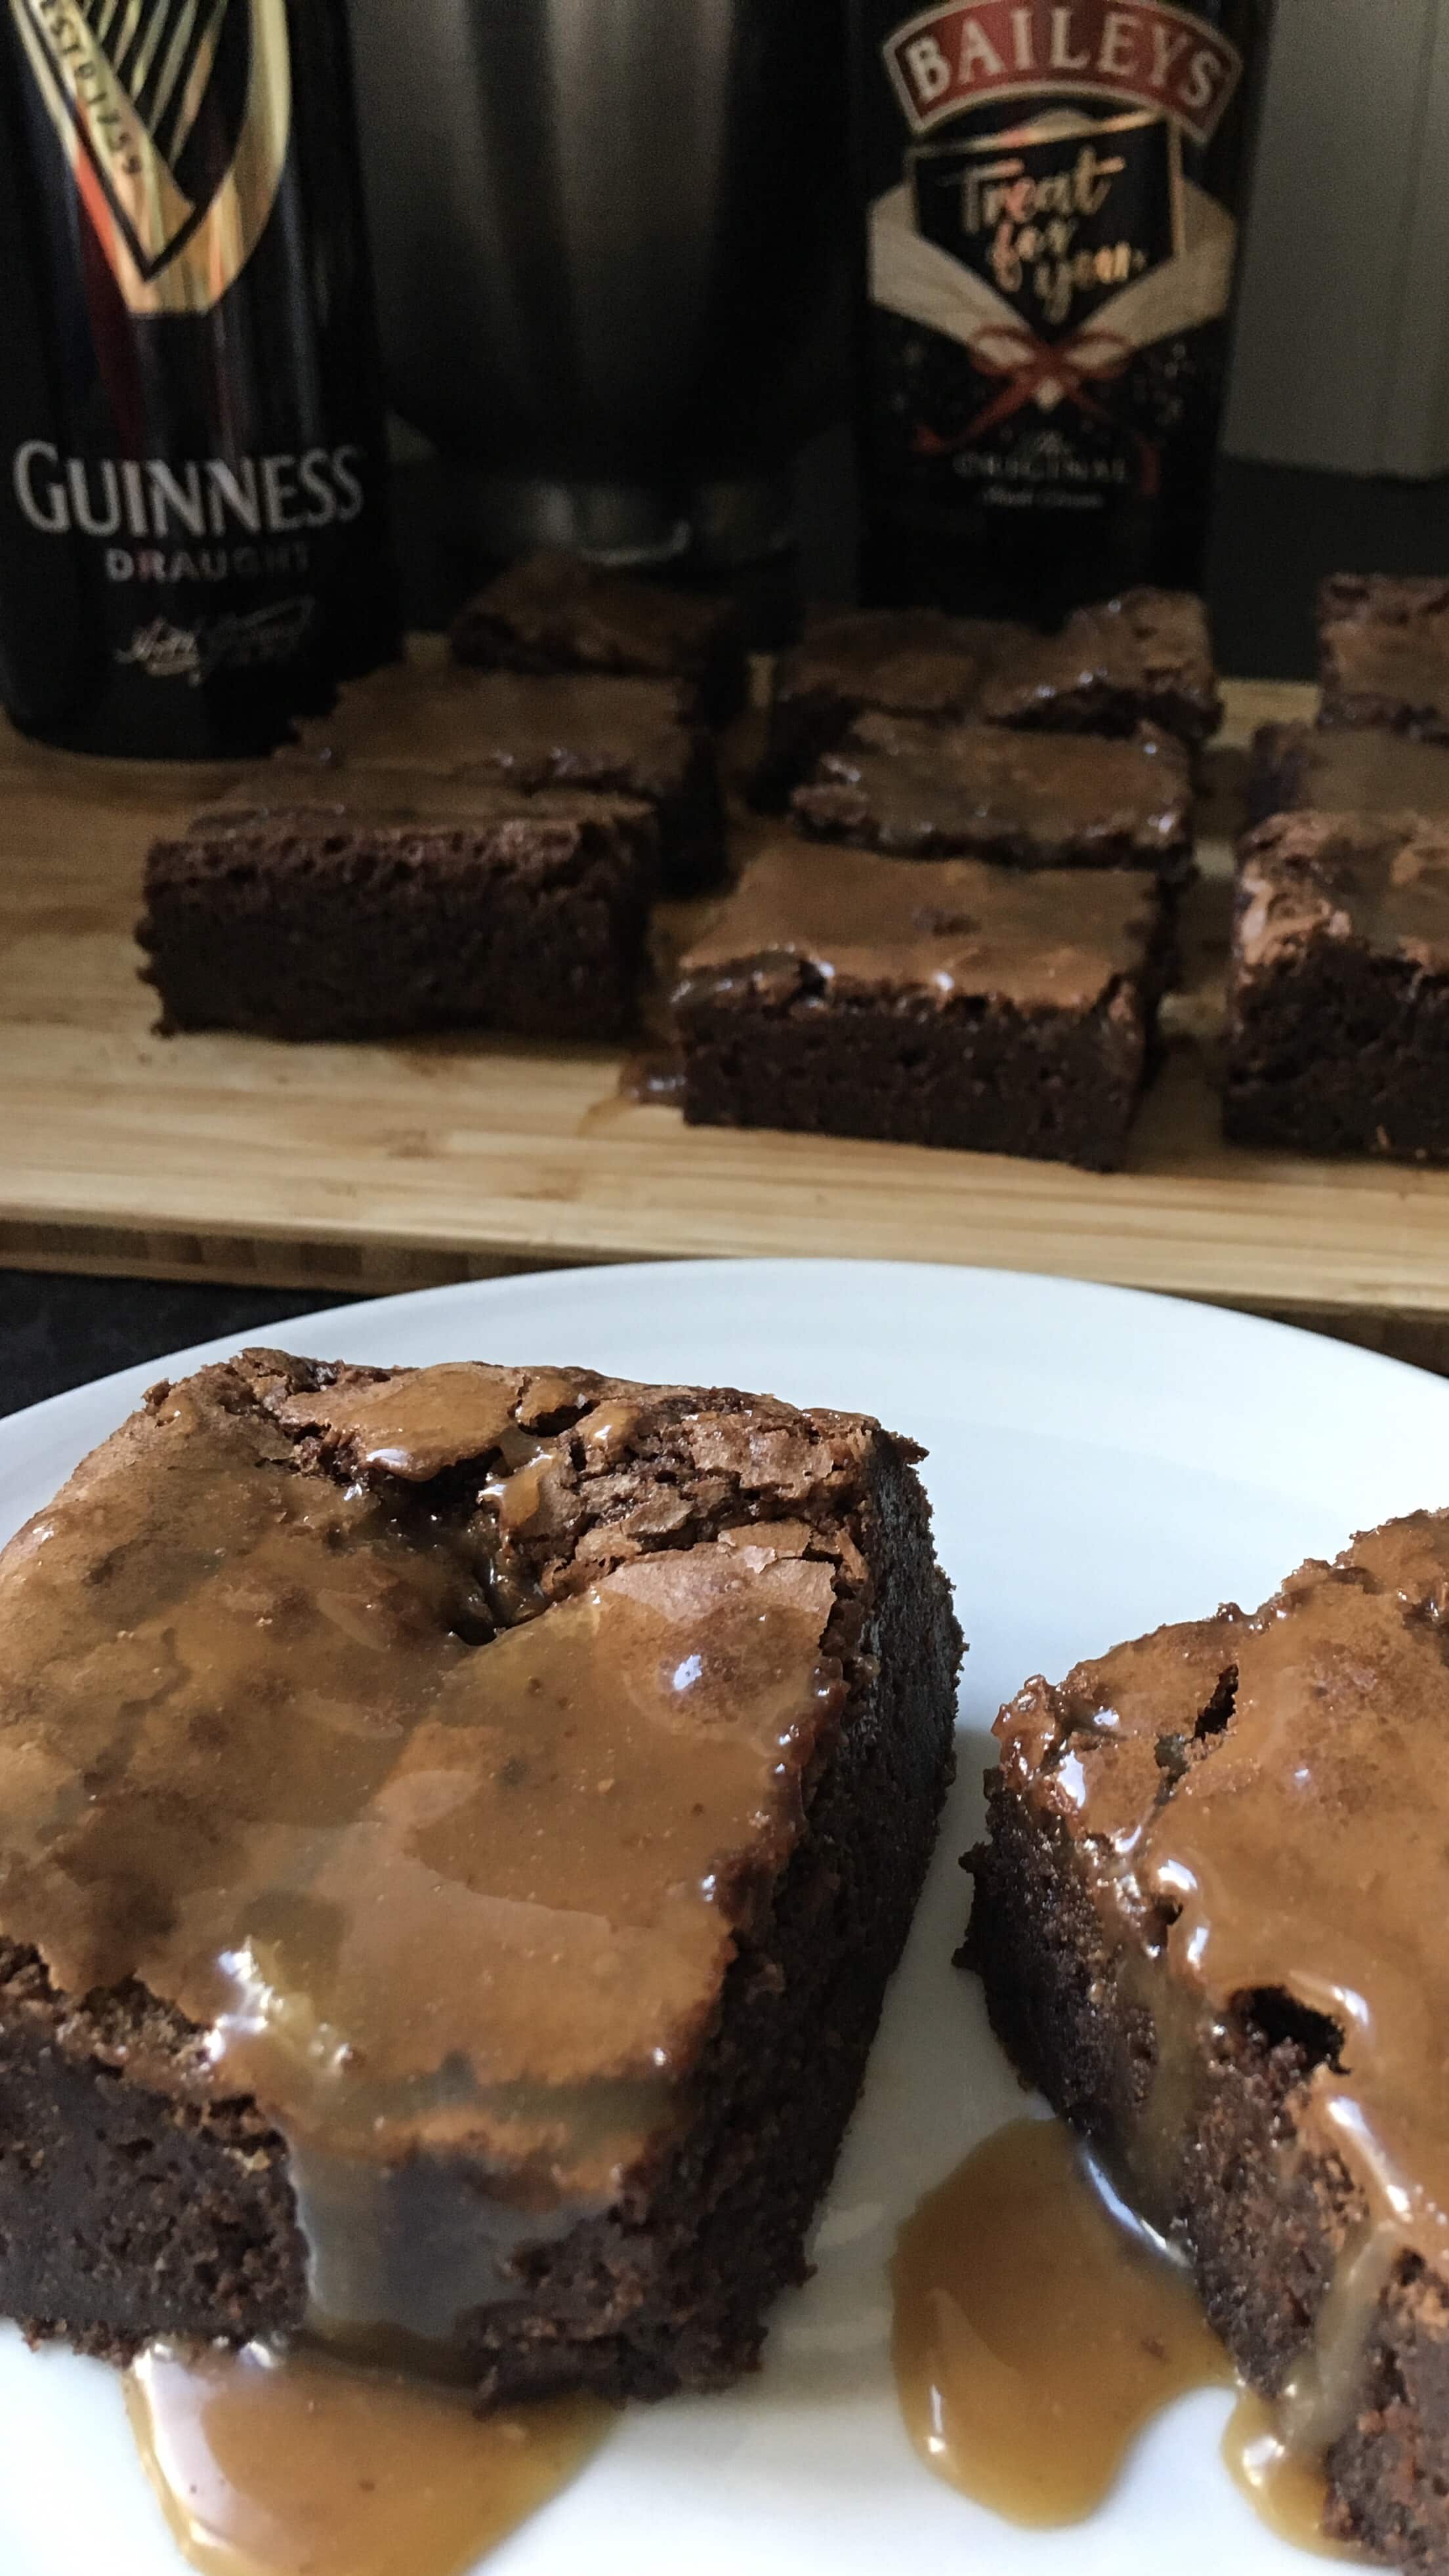 Two Guinness brownies with a salted caramel Bailey's Glaze on a white plate. More brownies and a bottle of Bailey's Irish cream and a can of Guinness can be seen in the background.